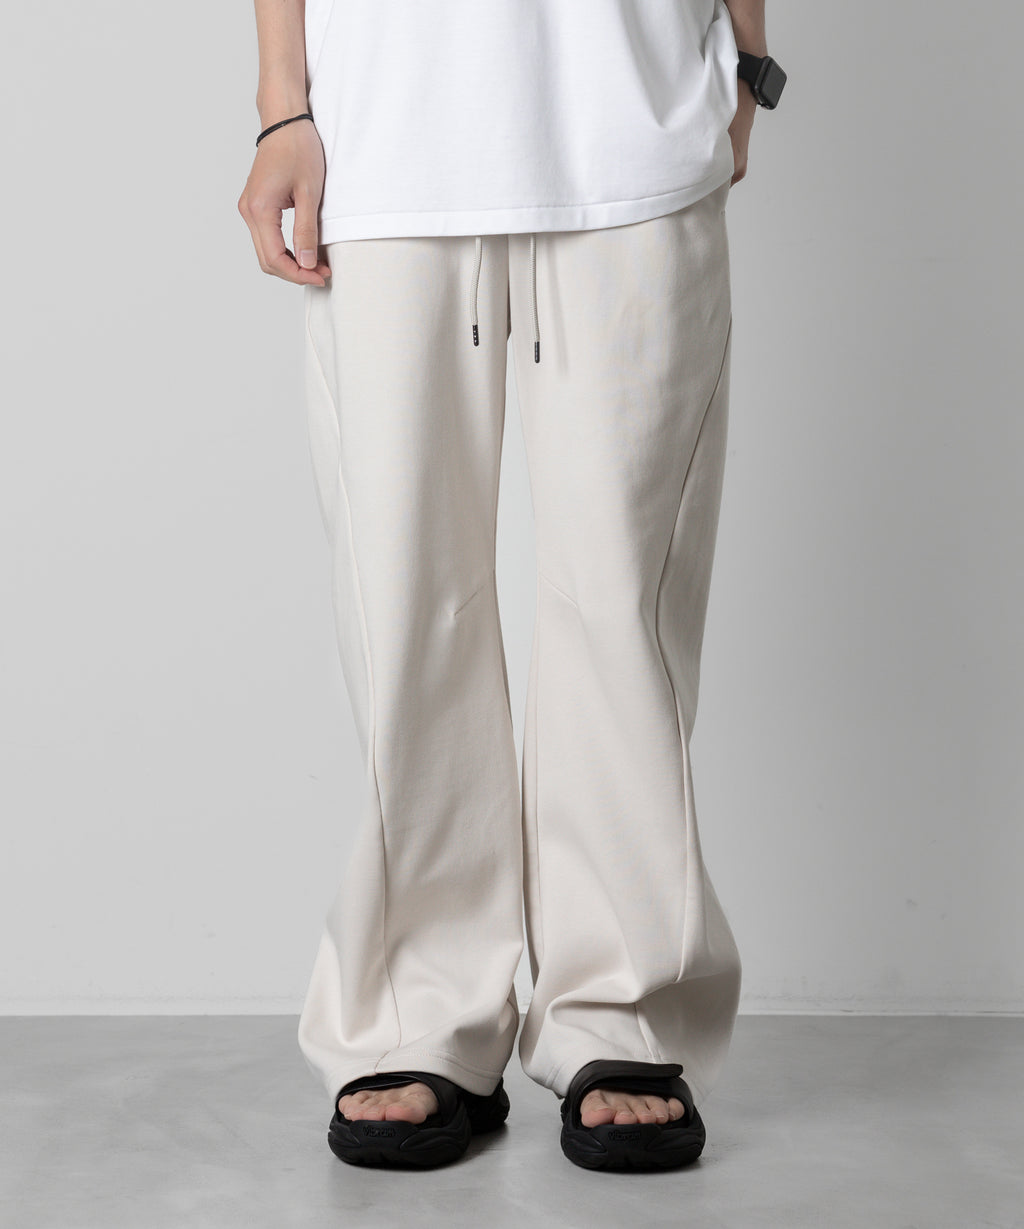 ATTACHMENT アタッチメントのCO/PE DOUBLE KNIT THREE DIMENSIONAL WIDE PANTS - OFF WHITEの公式通販サイトsession福岡セレクトショップ